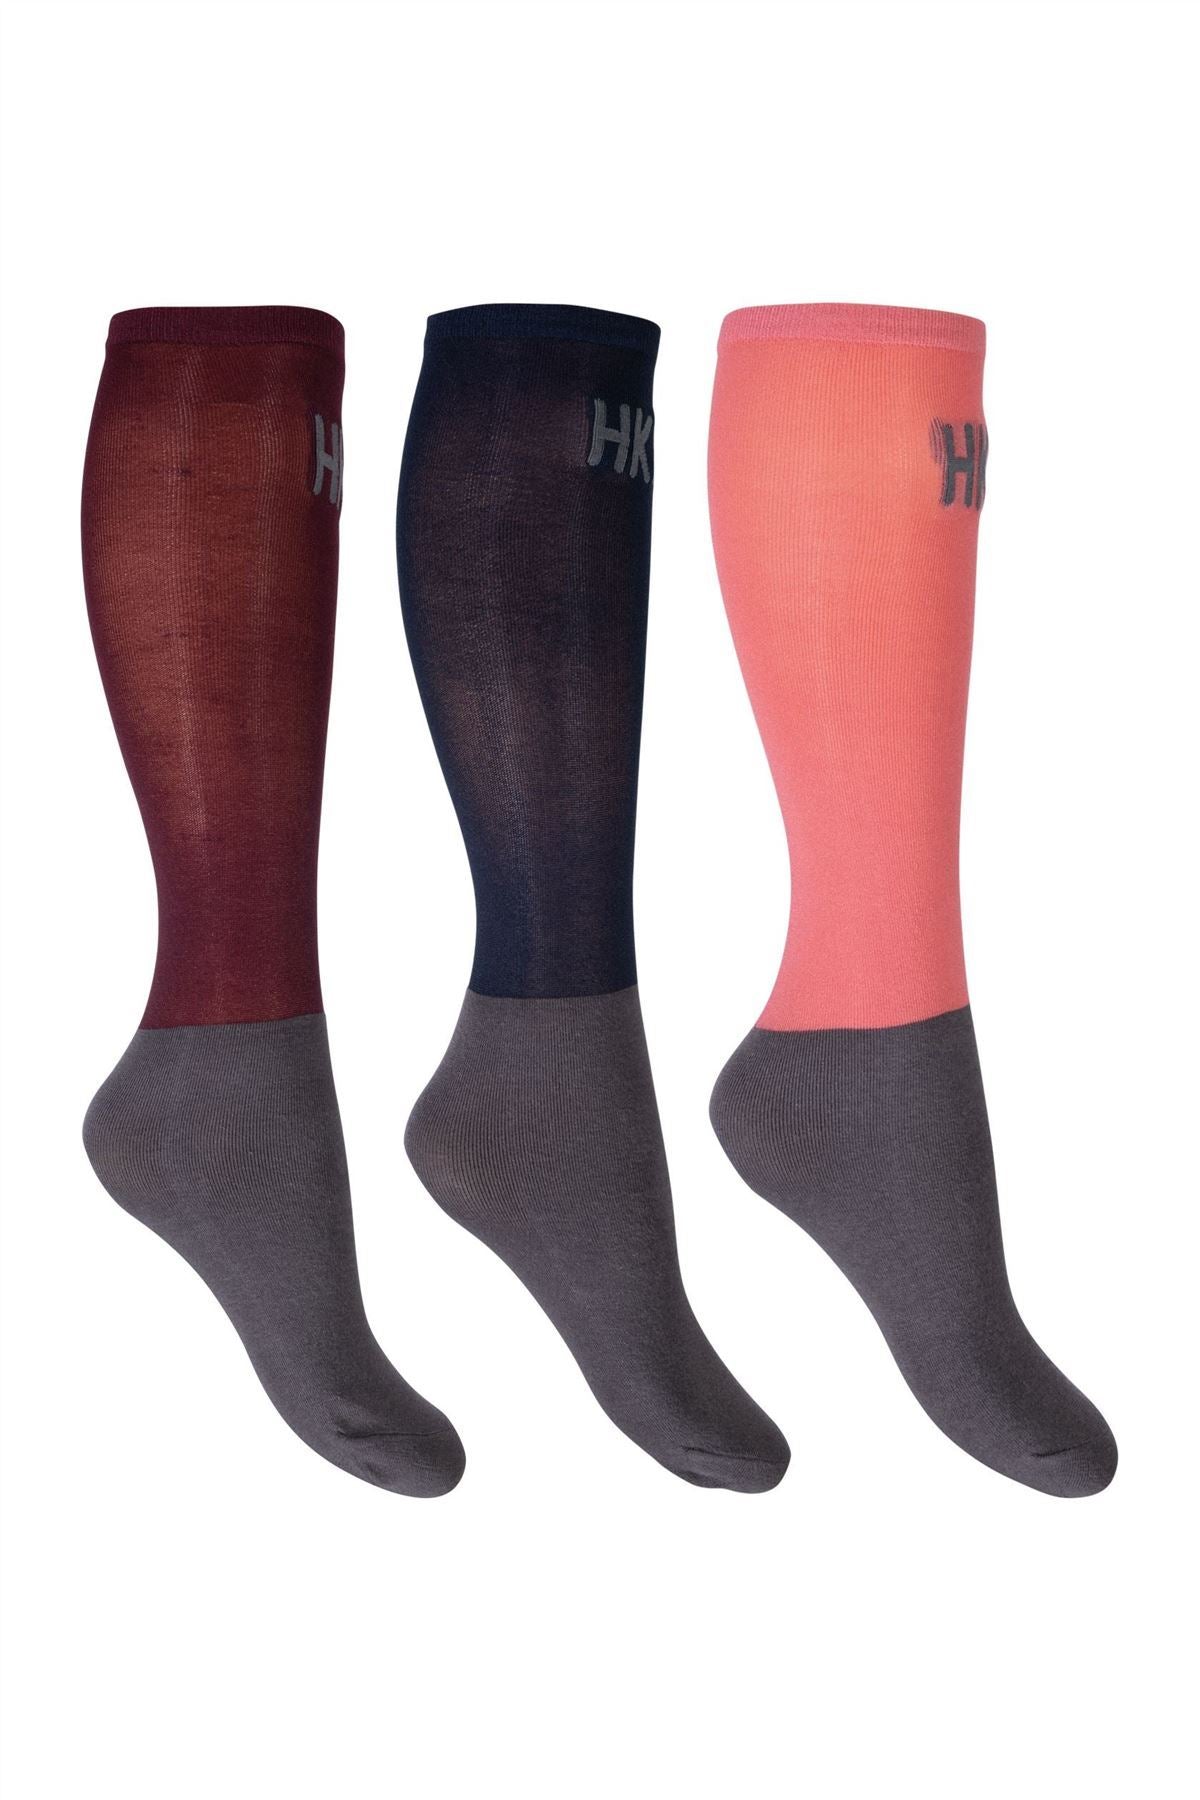 HKM Horse Riding Socks Microcotton Colour Set Of 3 - Just Horse Riders